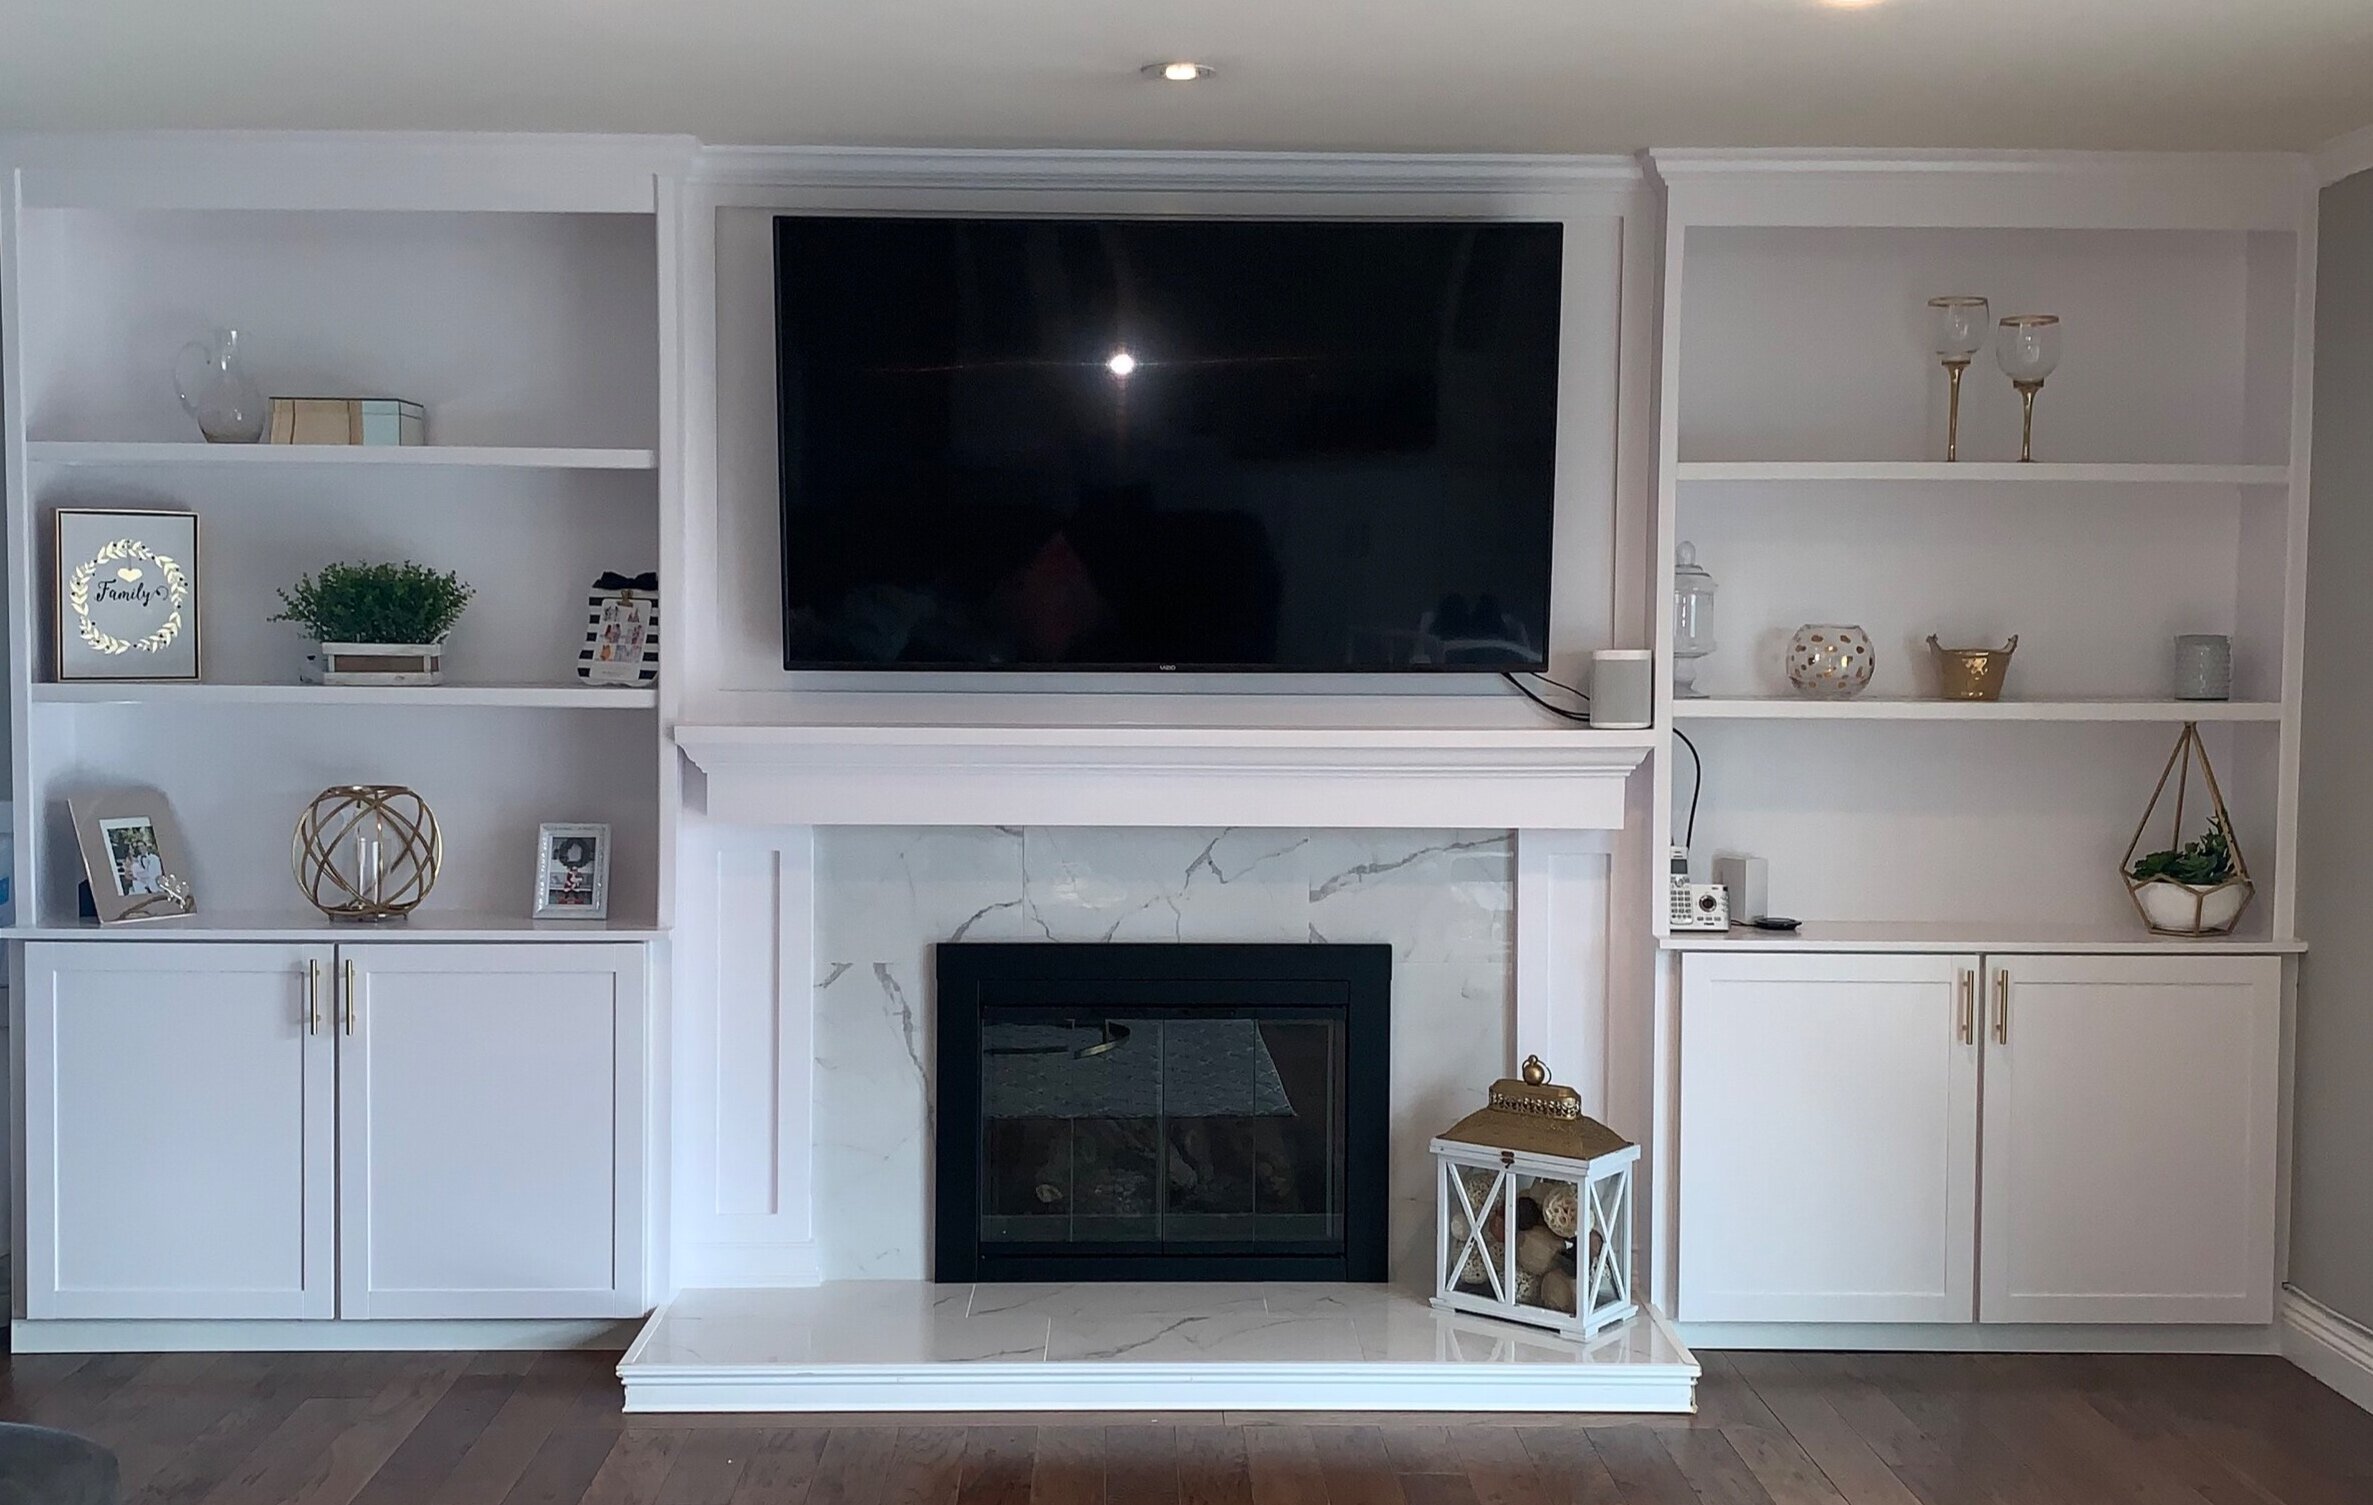 Diy Fireplace Surround And Built Ins, Built In Bookcases Fireplace Plans